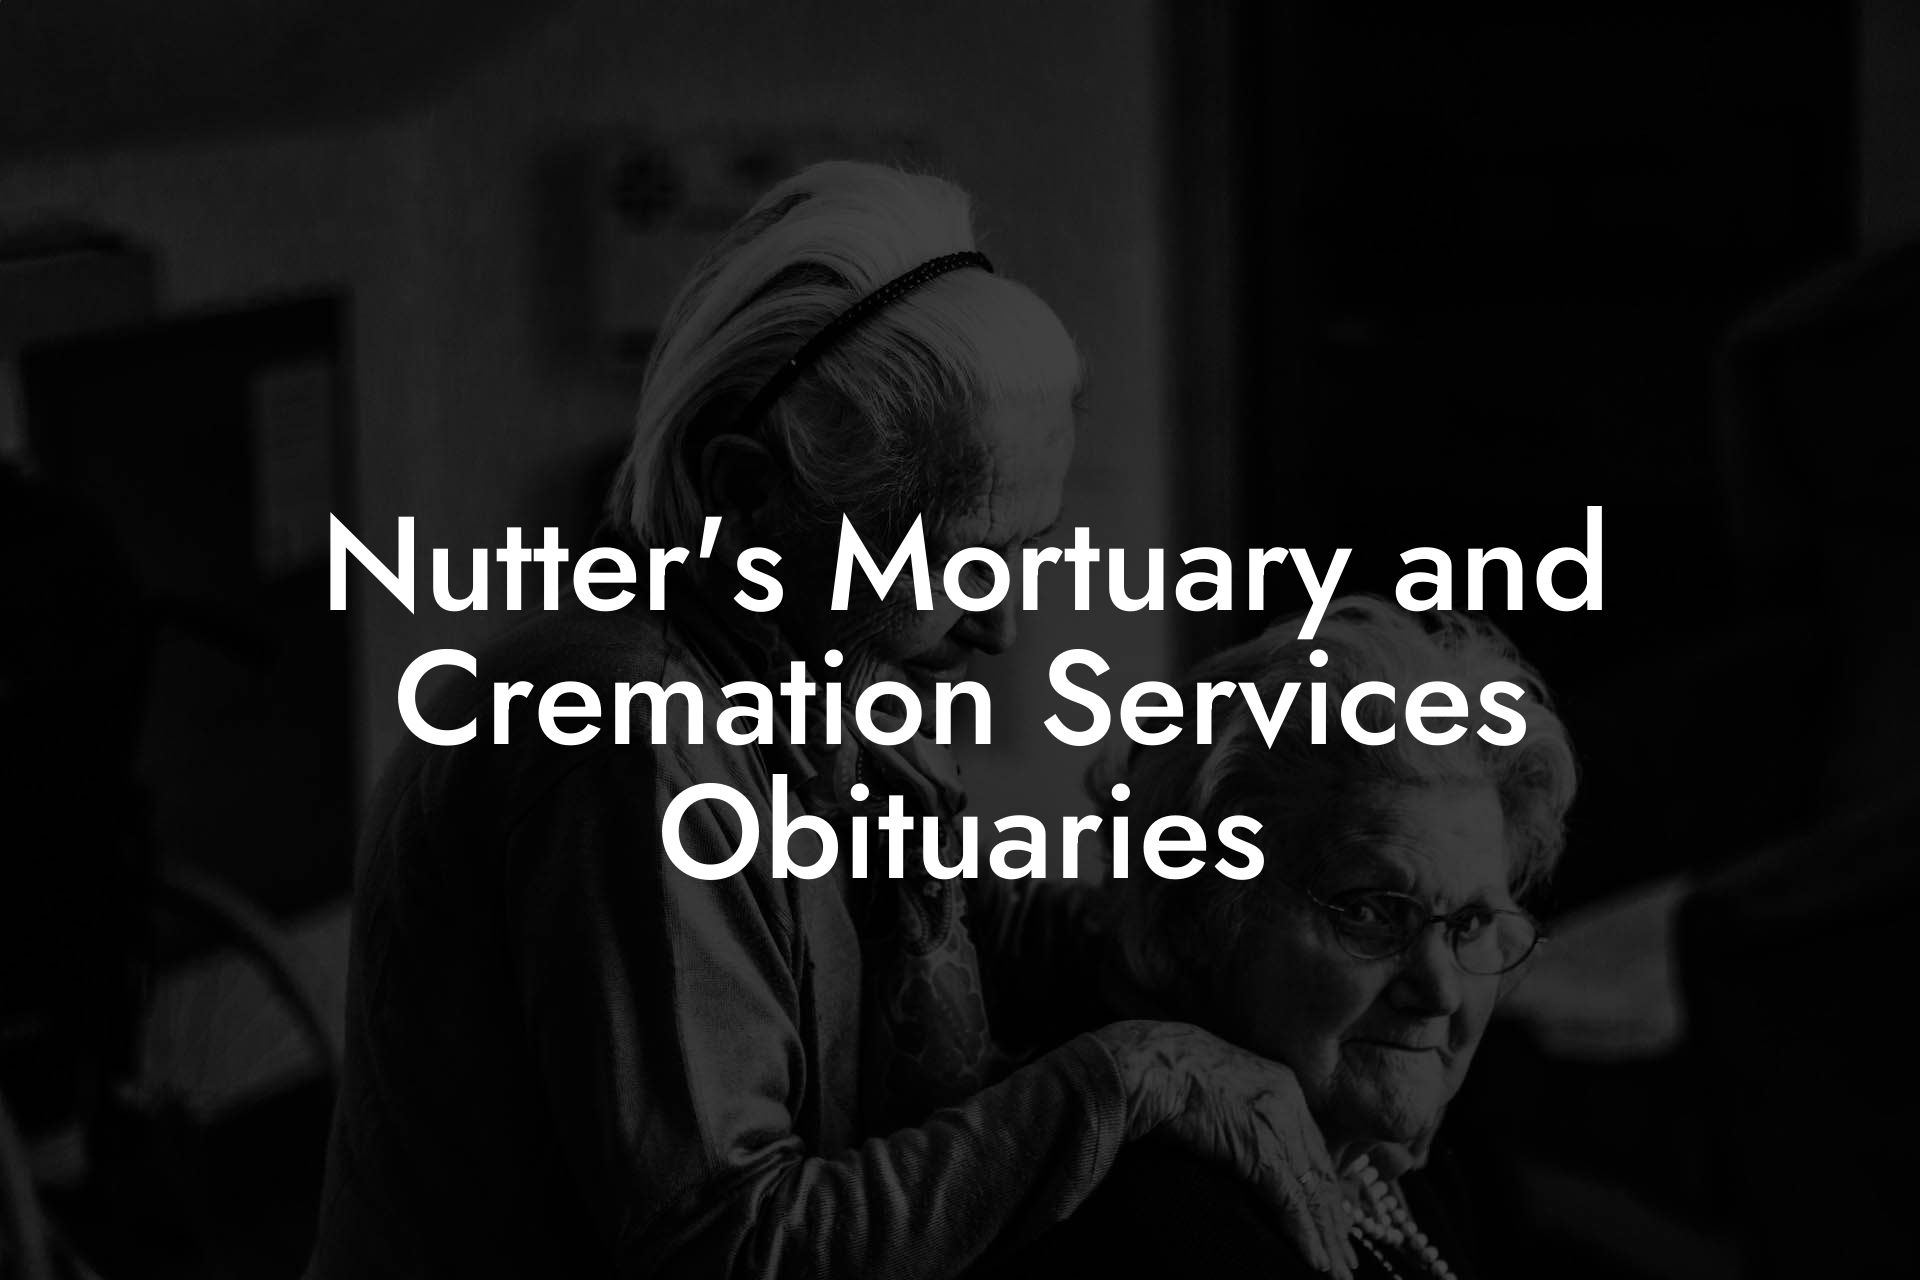 Nutter's Mortuary and Cremation Services Obituaries